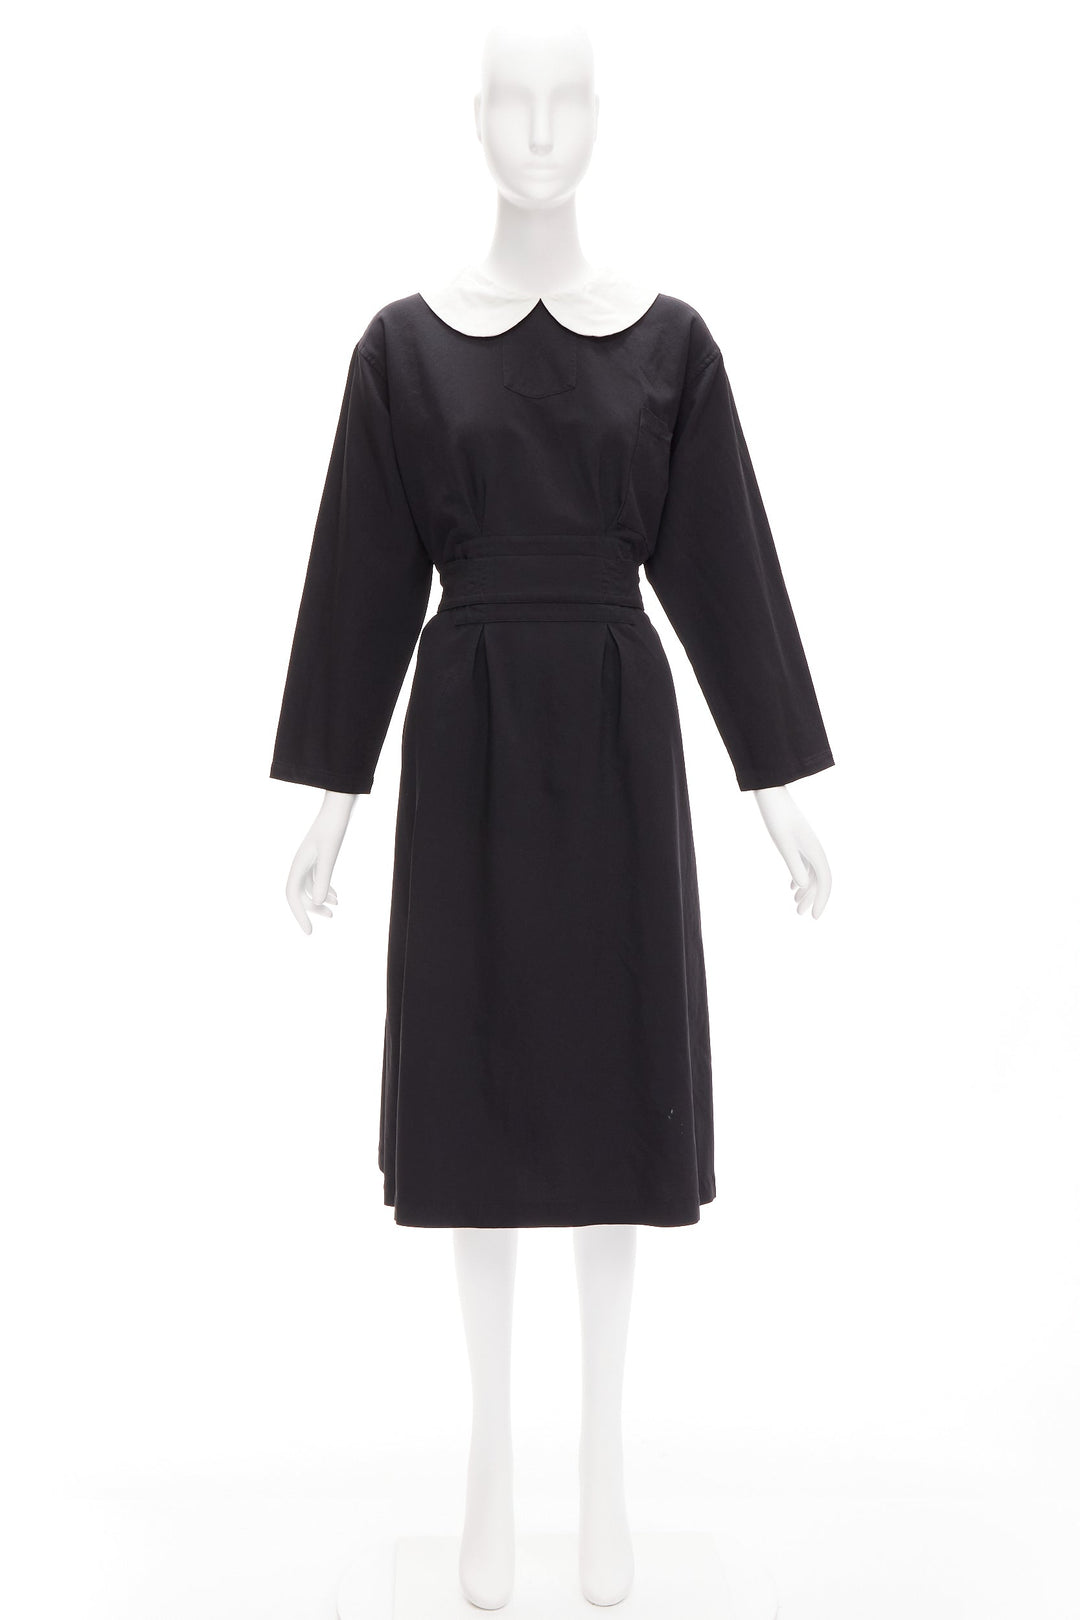 COMME DES GARCONS GIRL white Peter pan collar black belted dress S